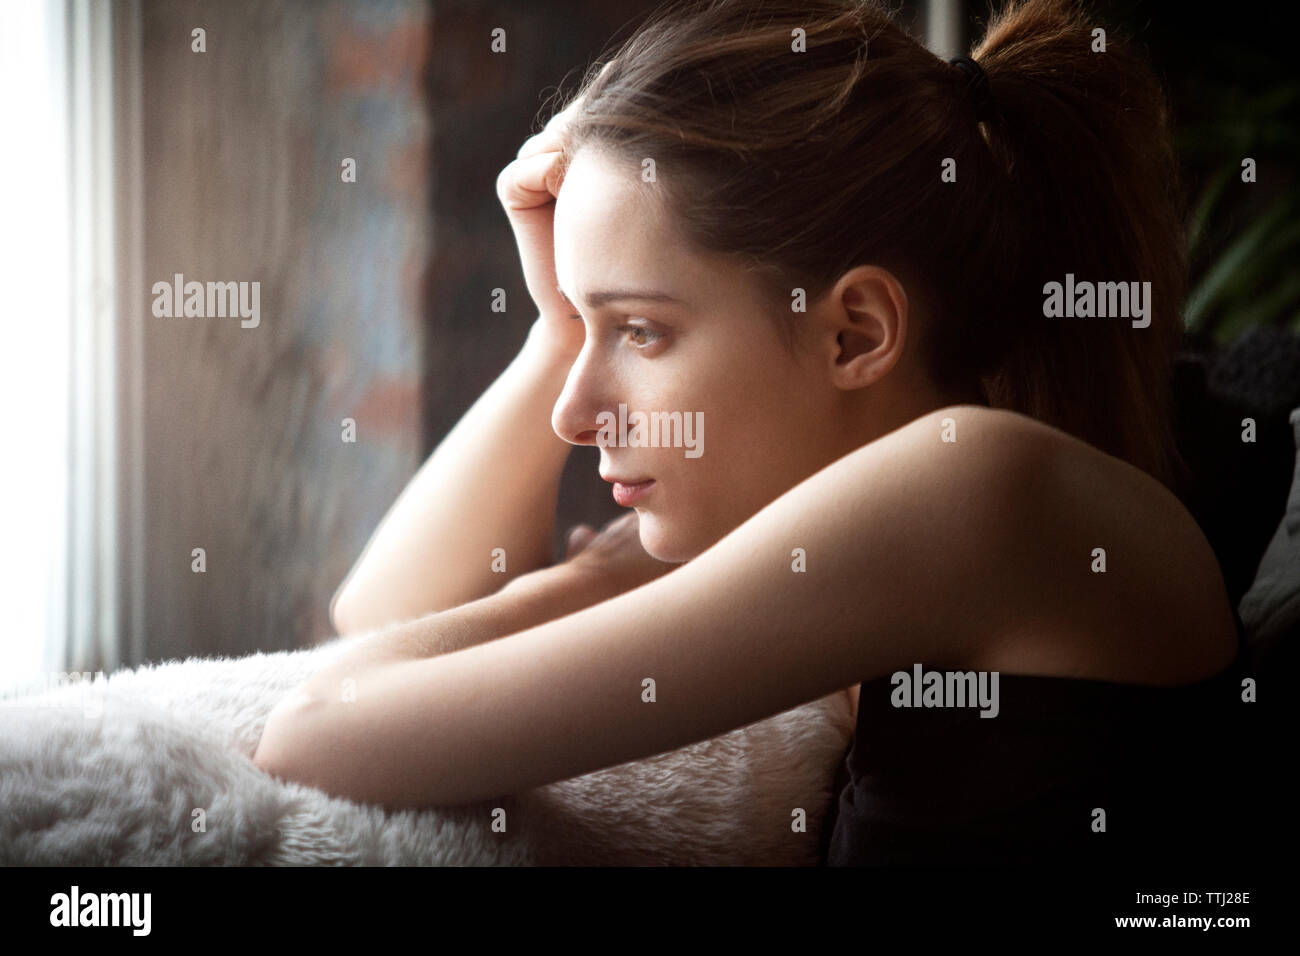 Side view of thoughtful woman looking away Stock Photo